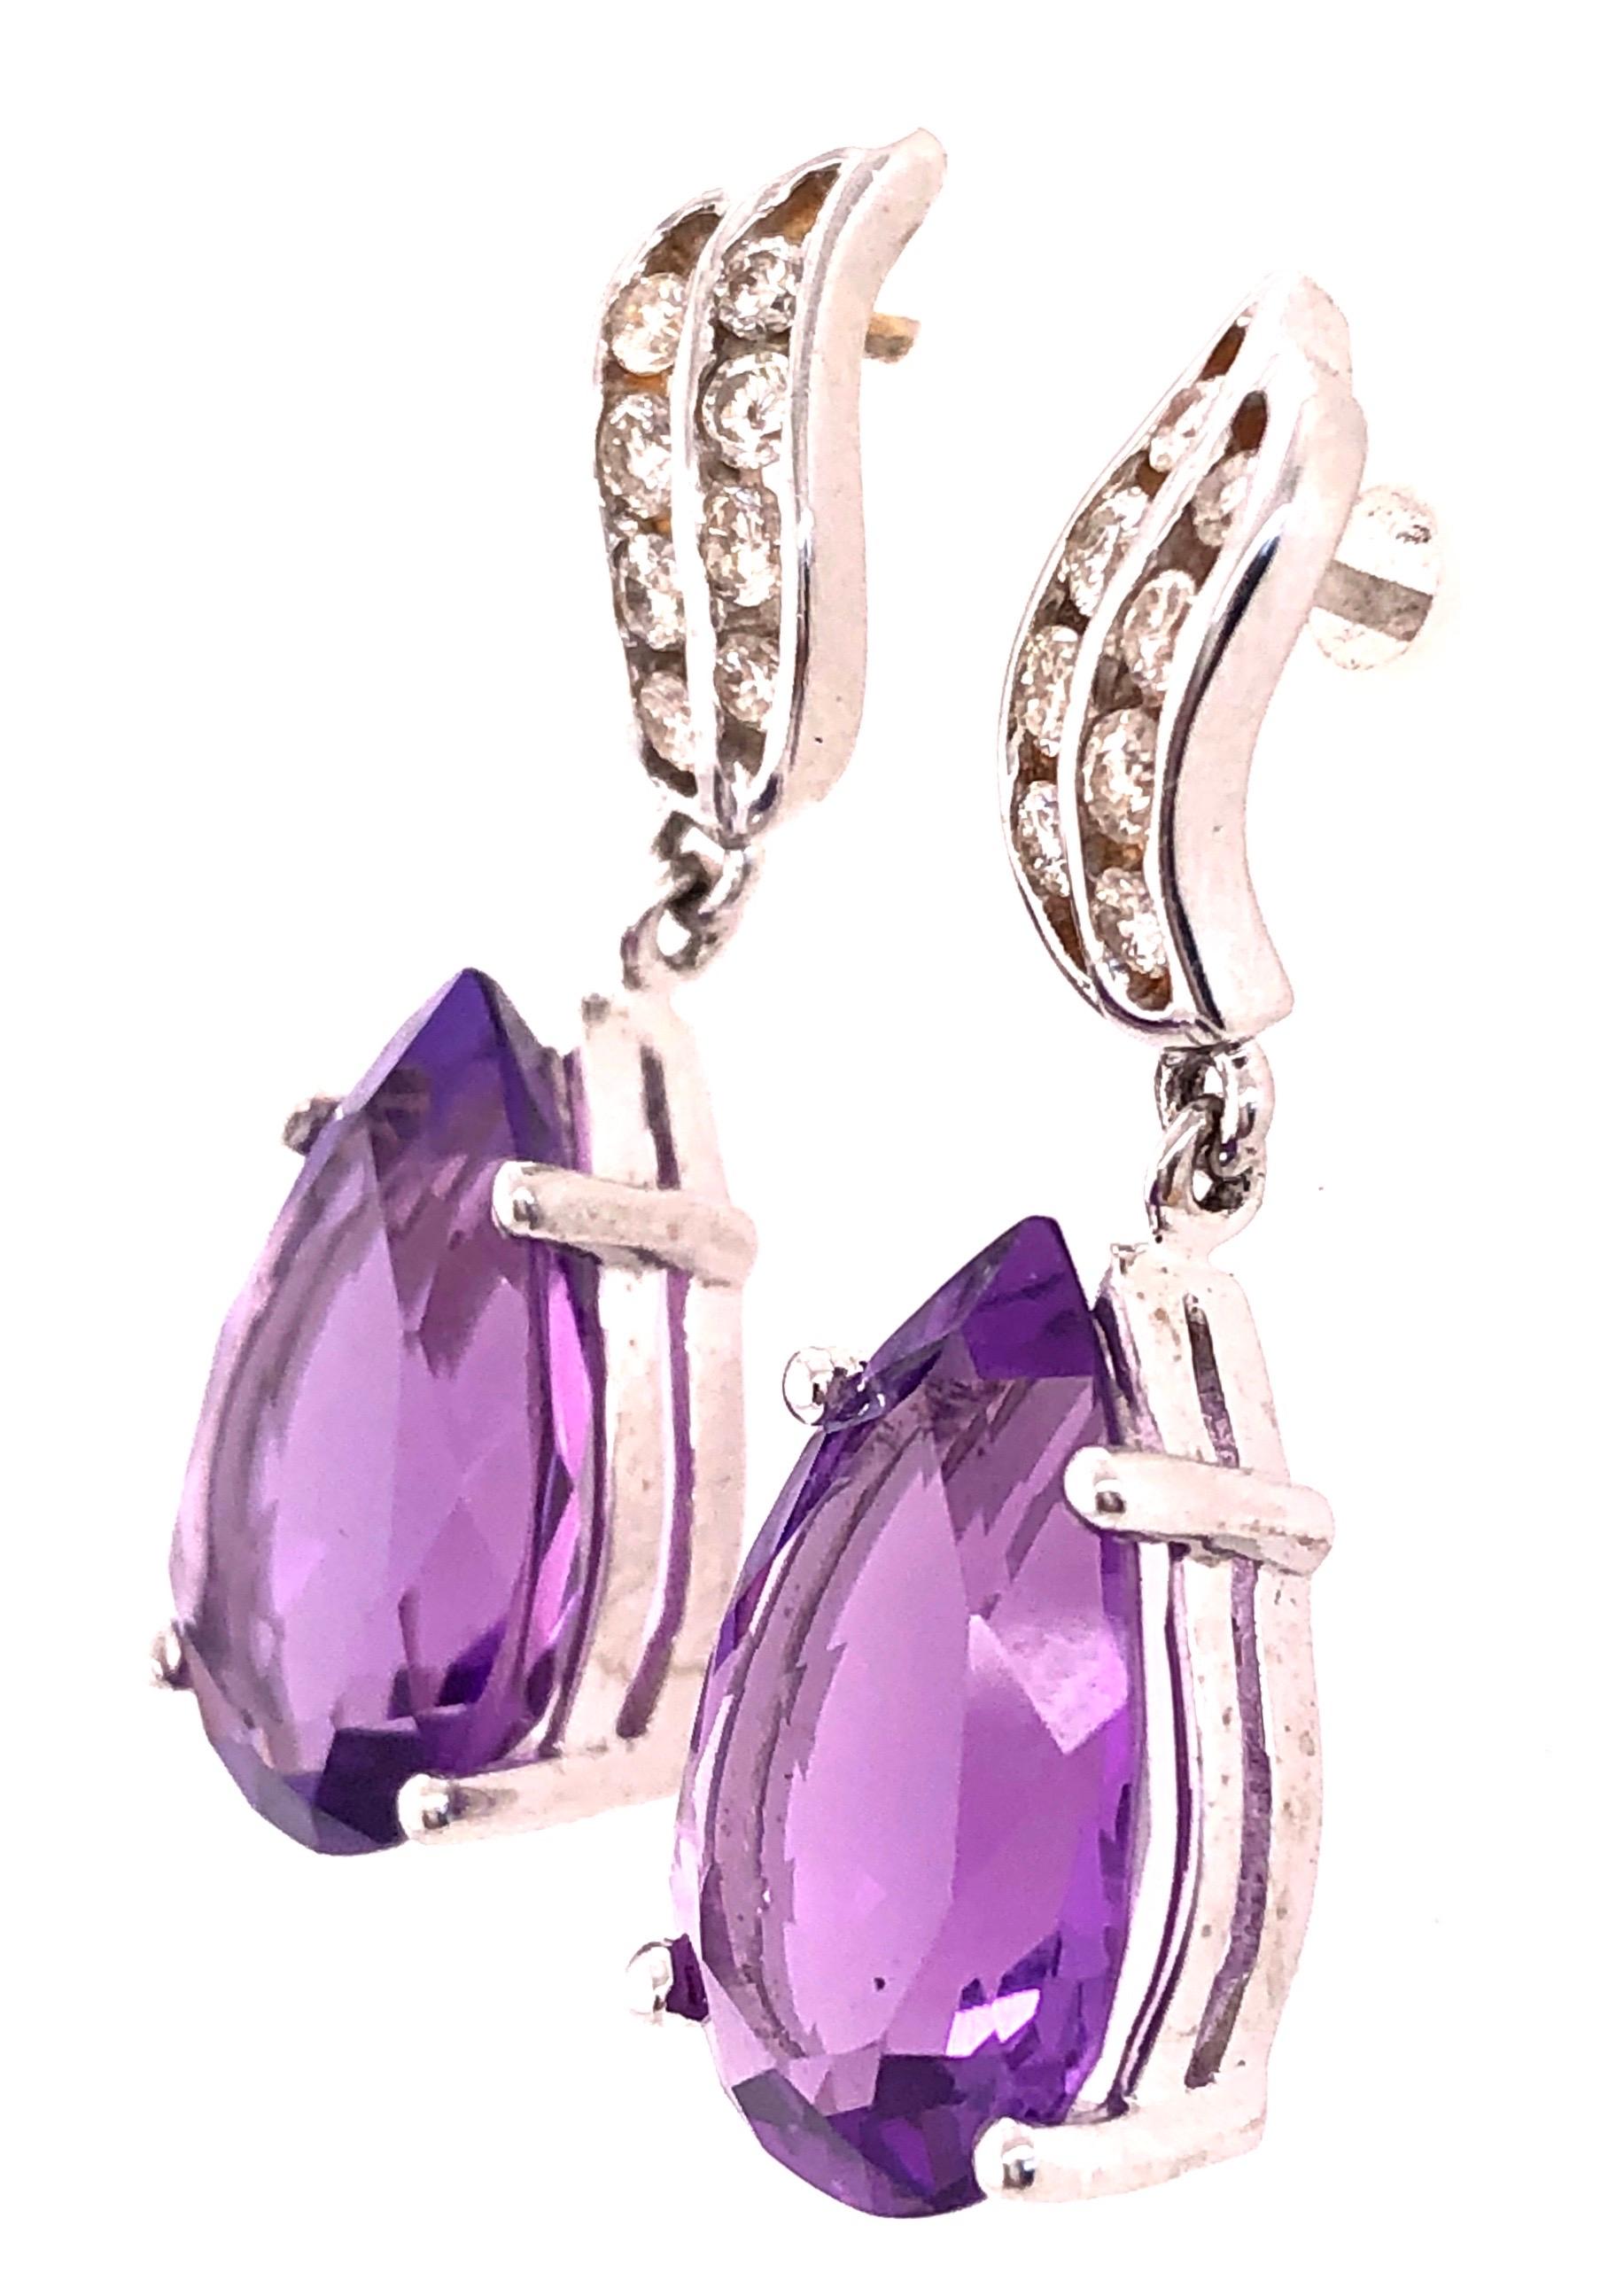 14 Kt White Gold Earrings with Diamonds And Amethysts 0.50 Total Diamond Weight
4.79 grams total  weight.